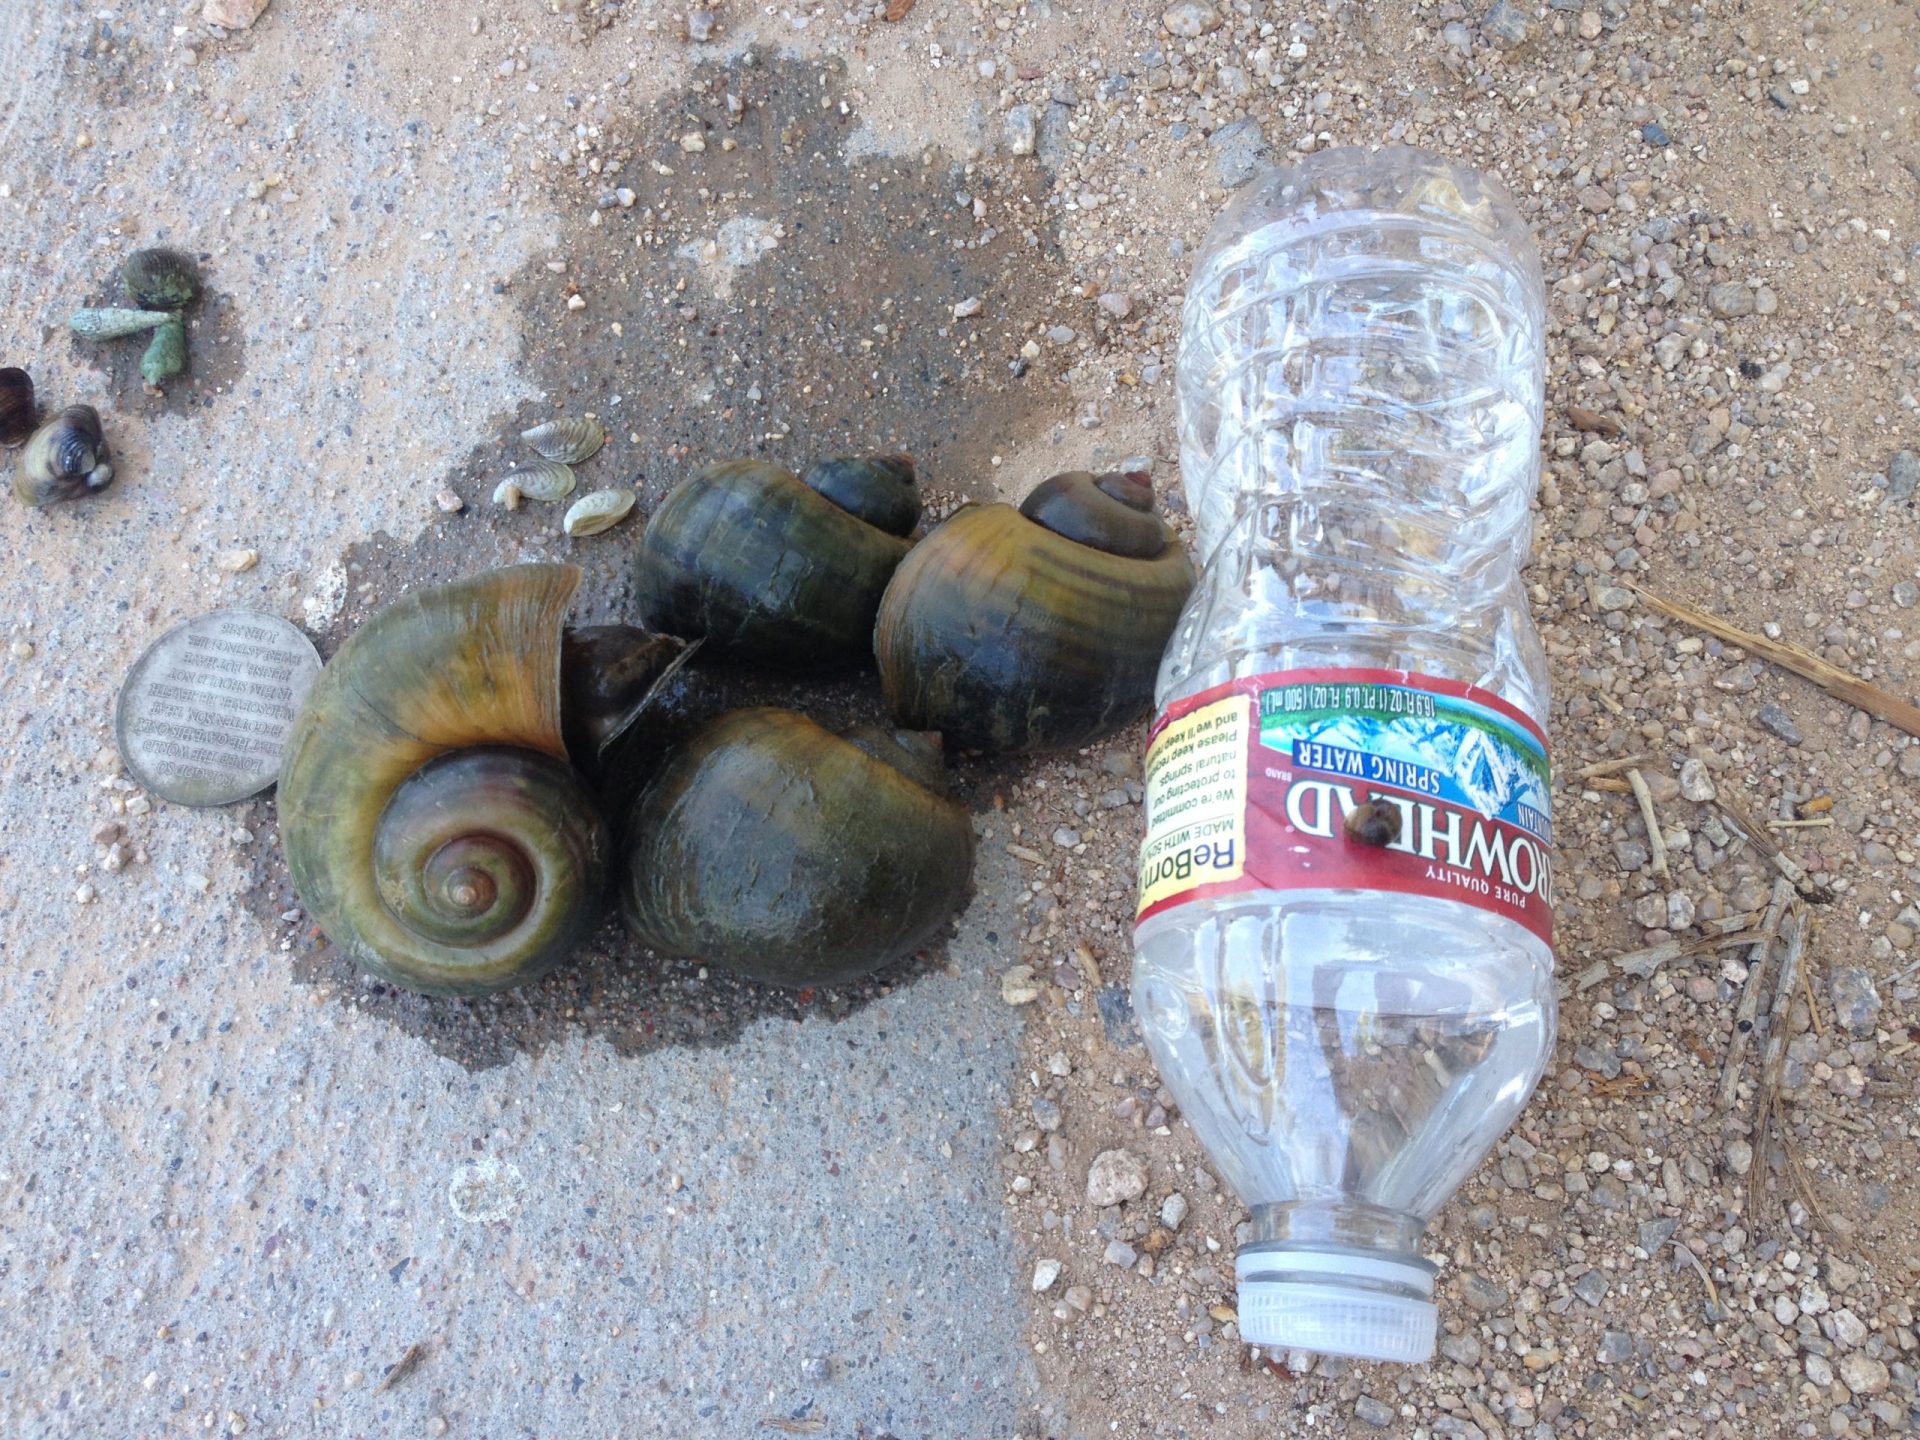 Invasive Apple Snails a Threat to Community’s Riparian Area